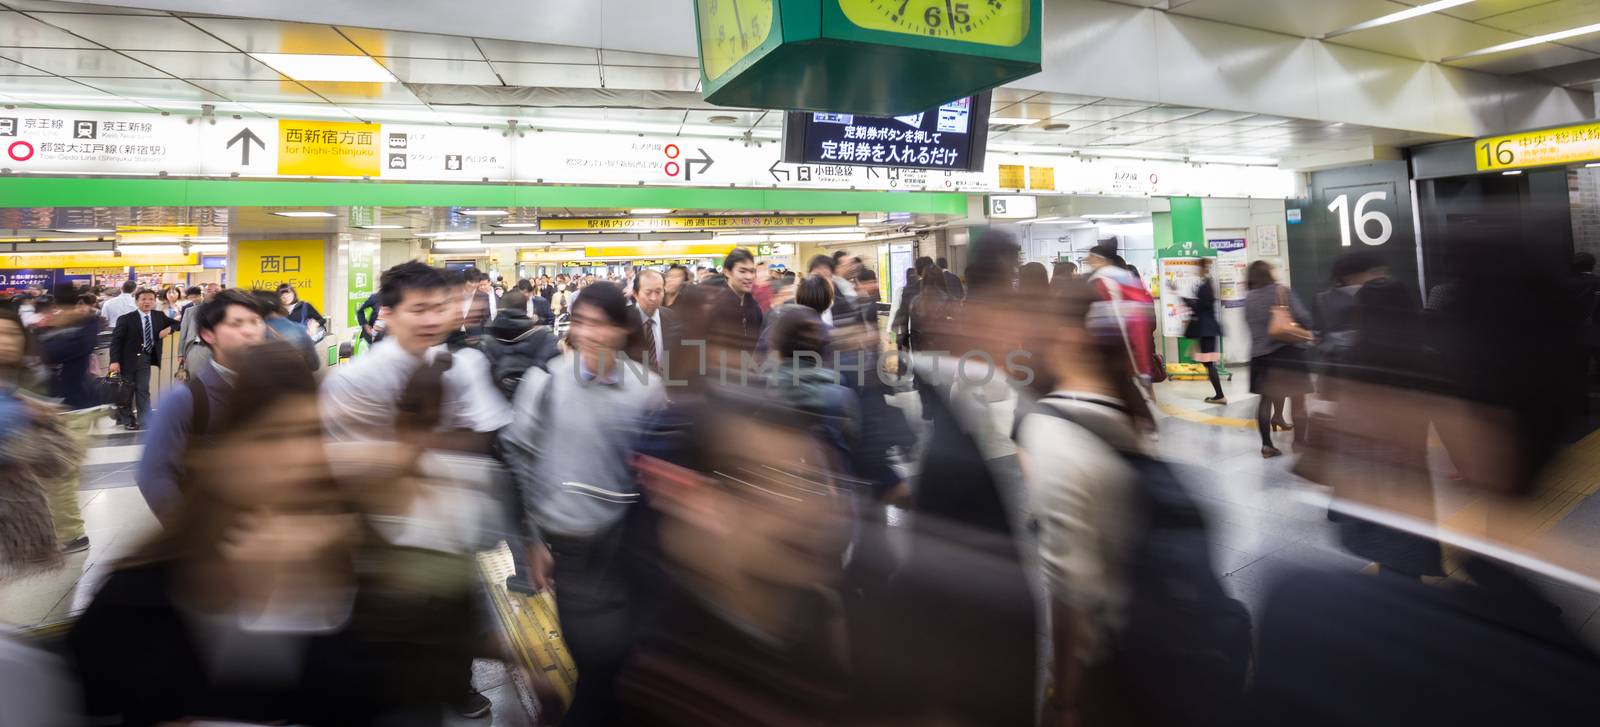 Crowd of people during rush hour on Tokyo metro.